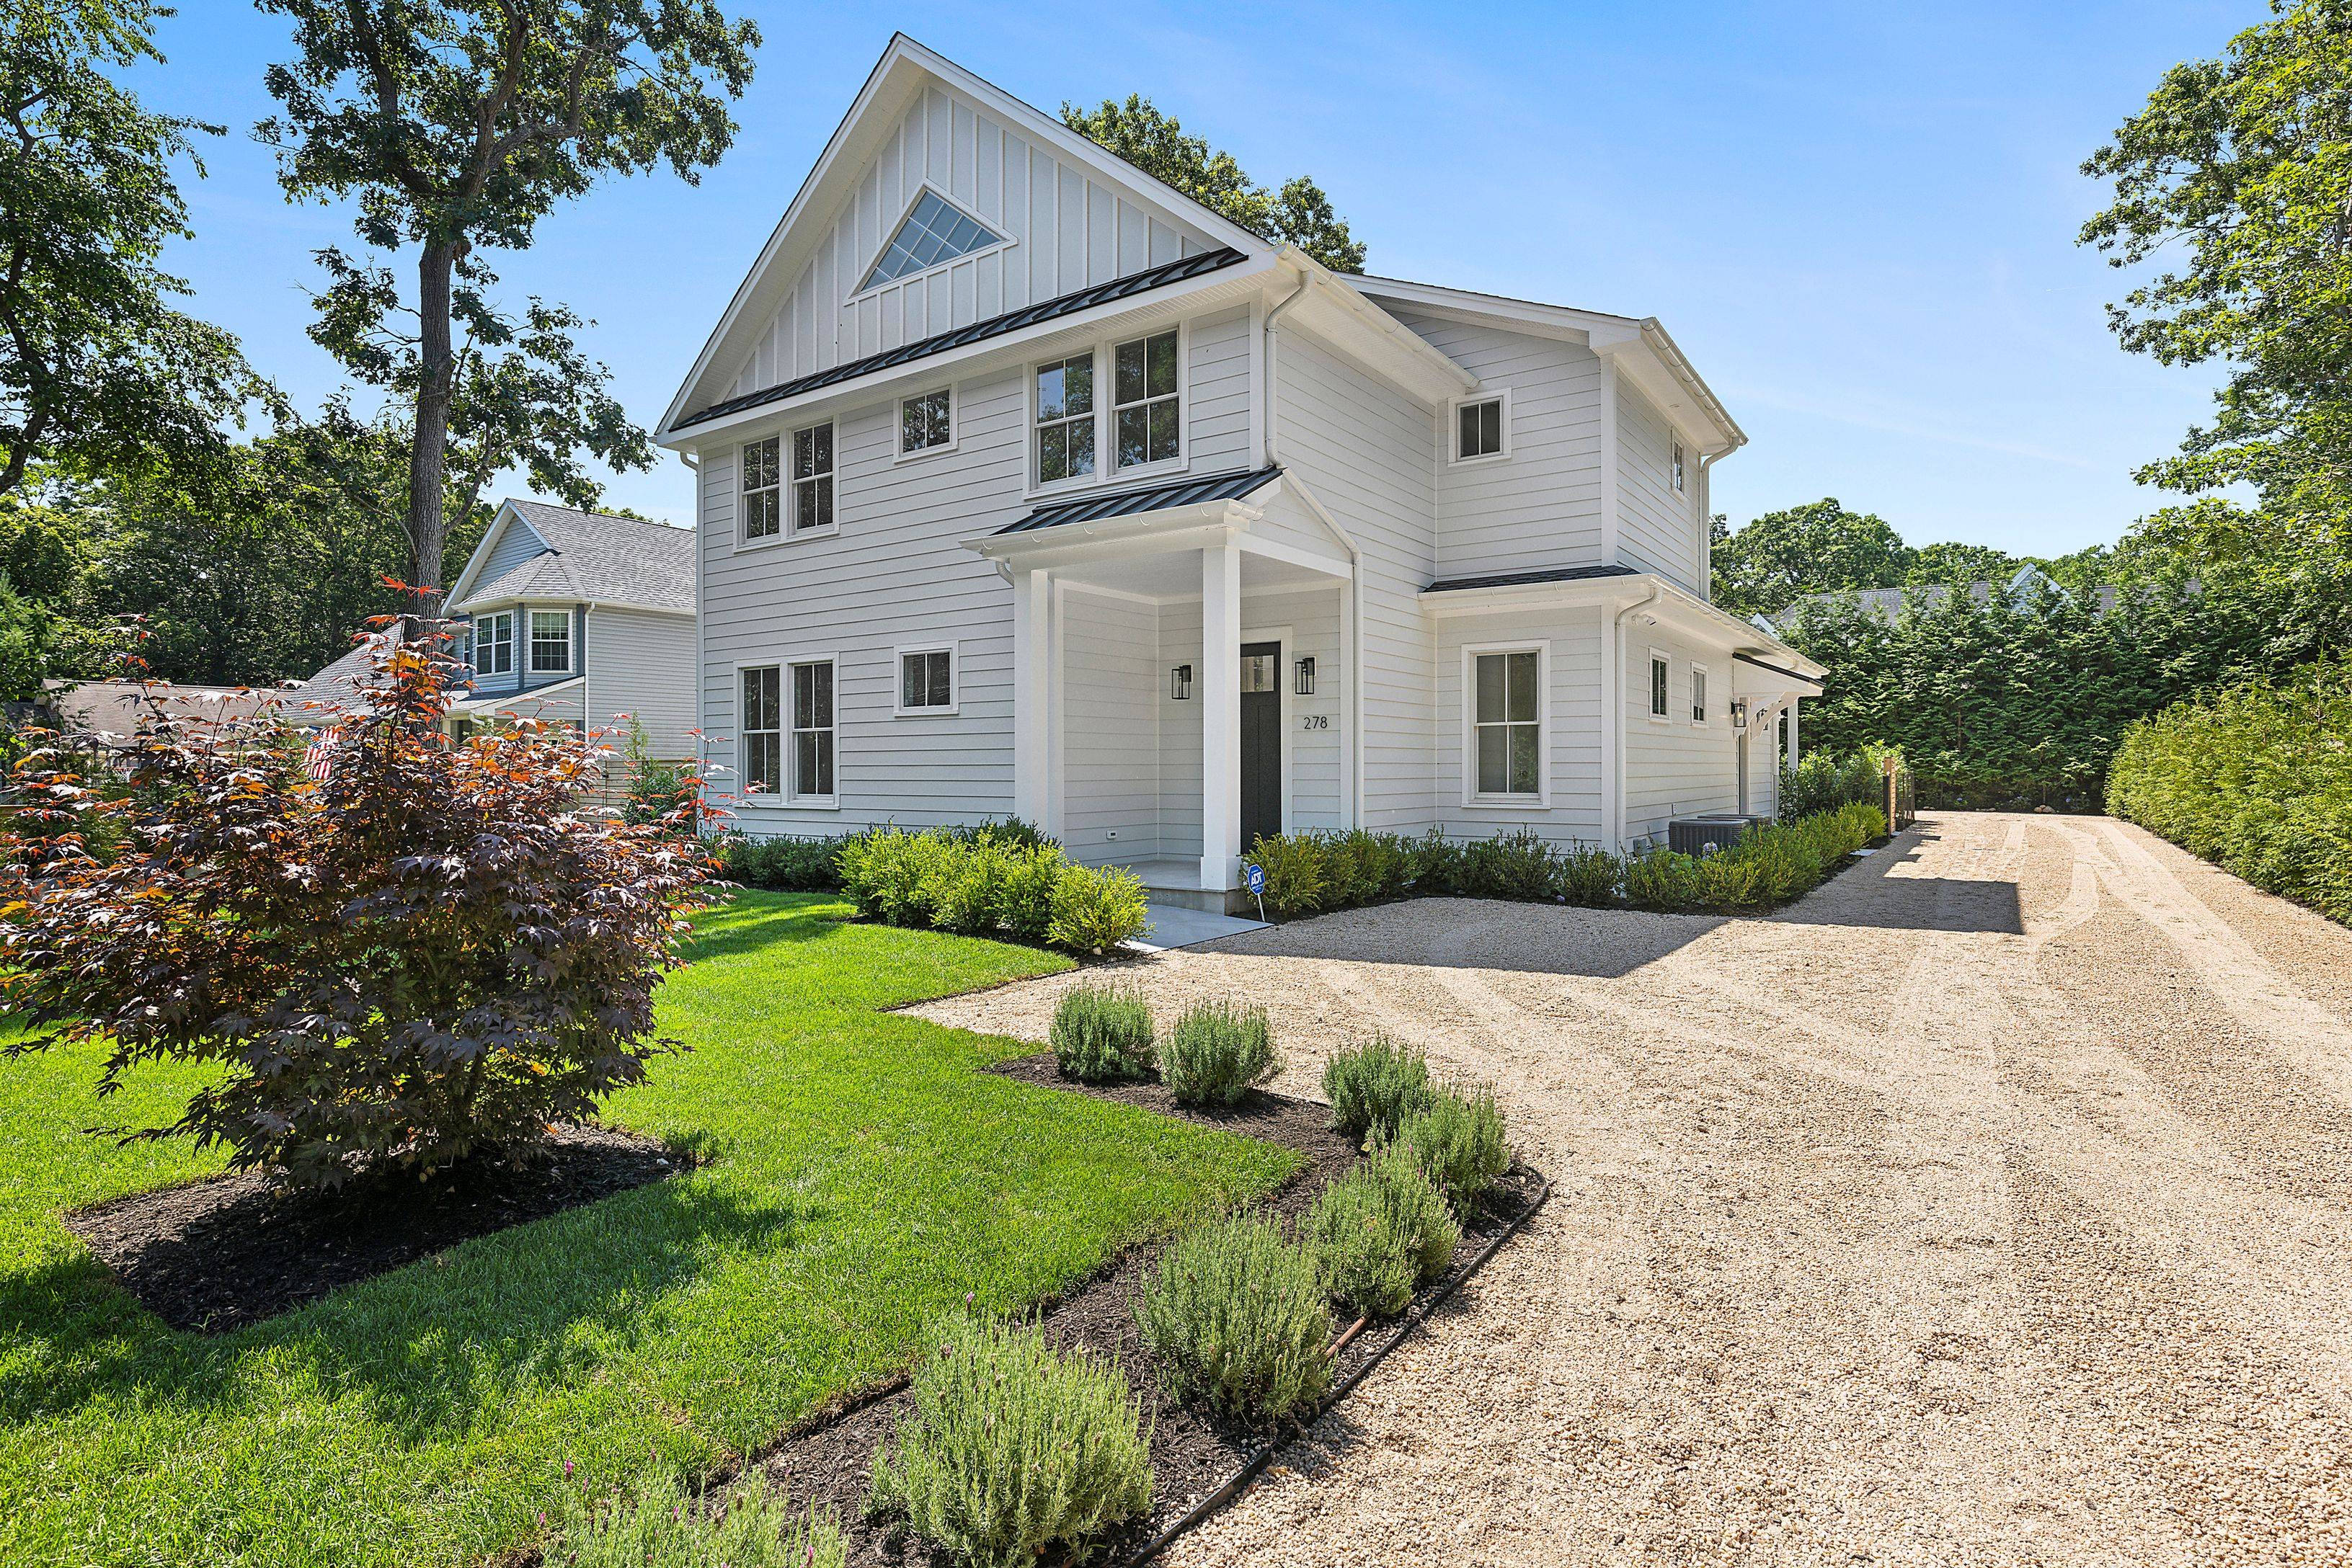 Classic Sag Harbor Village Traditional with a Modern Twist